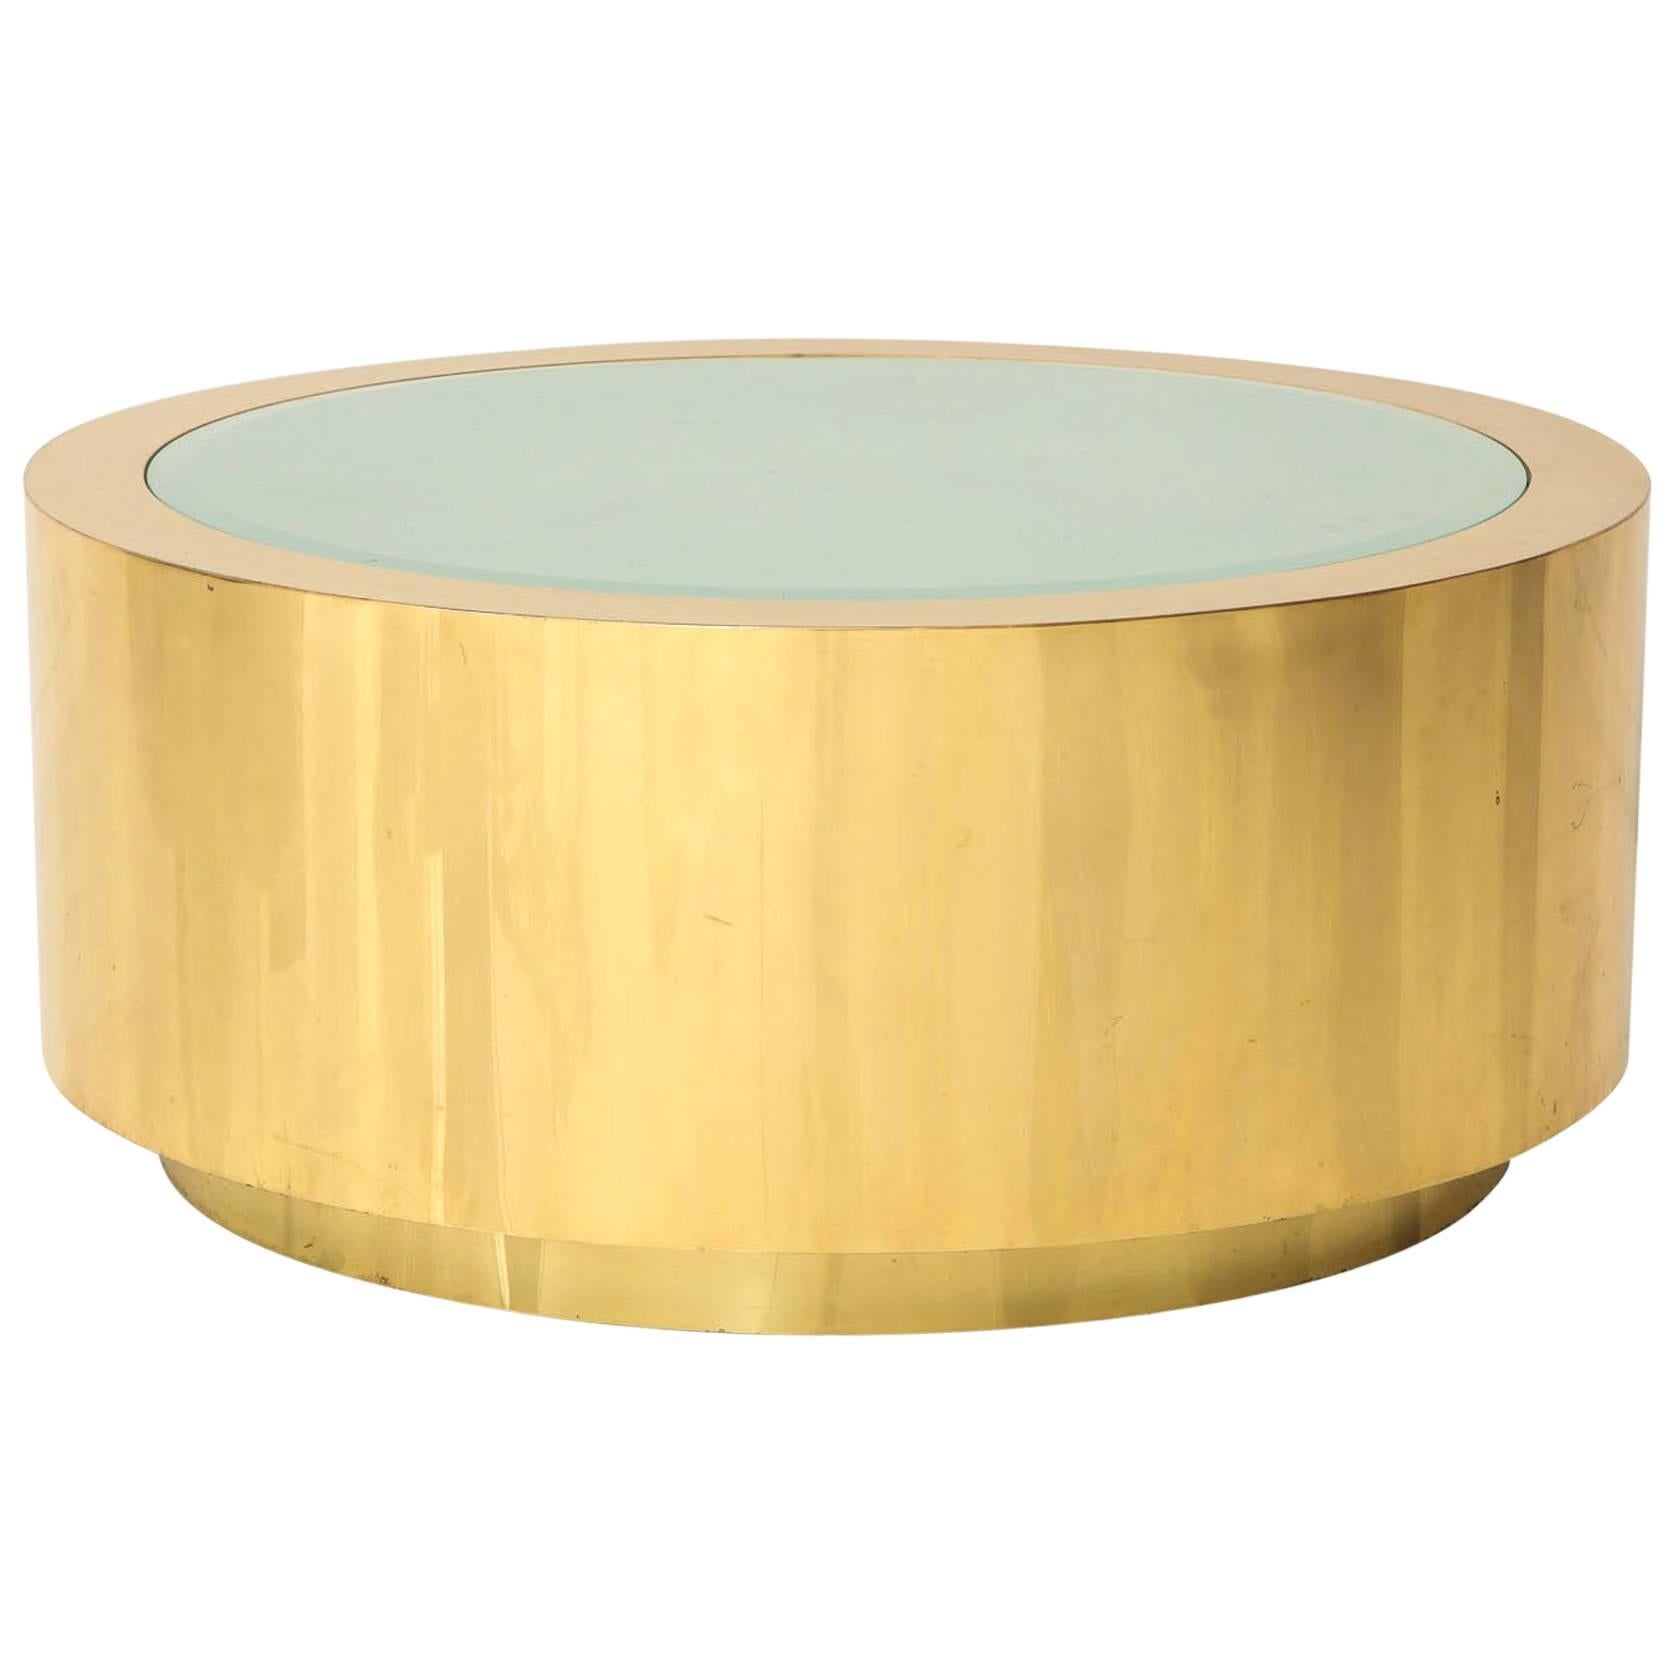 Fabulous Brass and Glass Coffee Table by Steve Chase For Sale